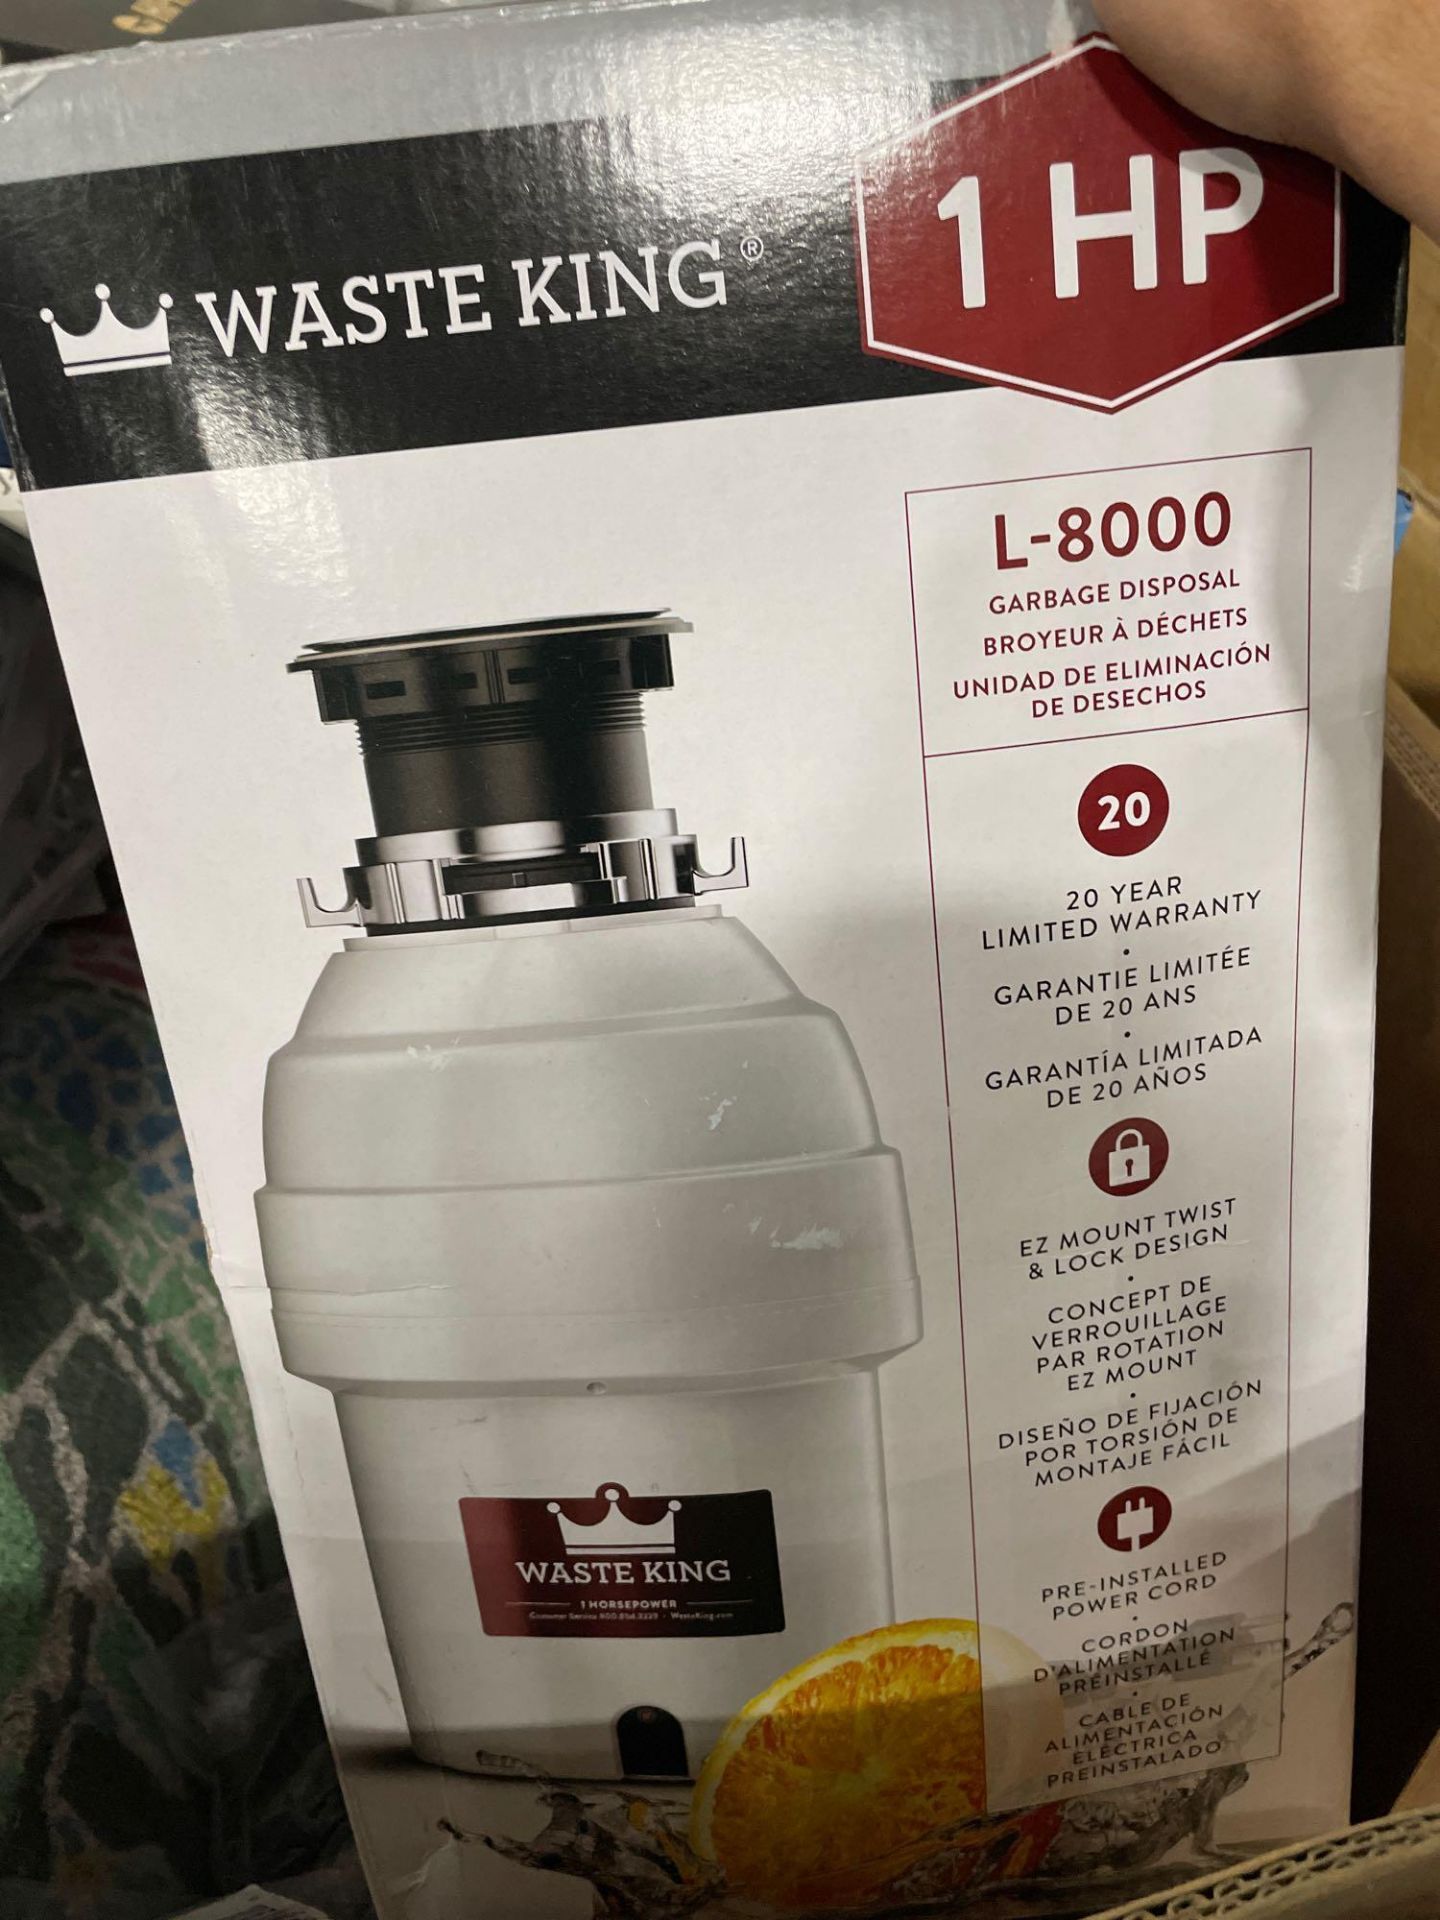 Waste king food disposals and more - Image 10 of 15